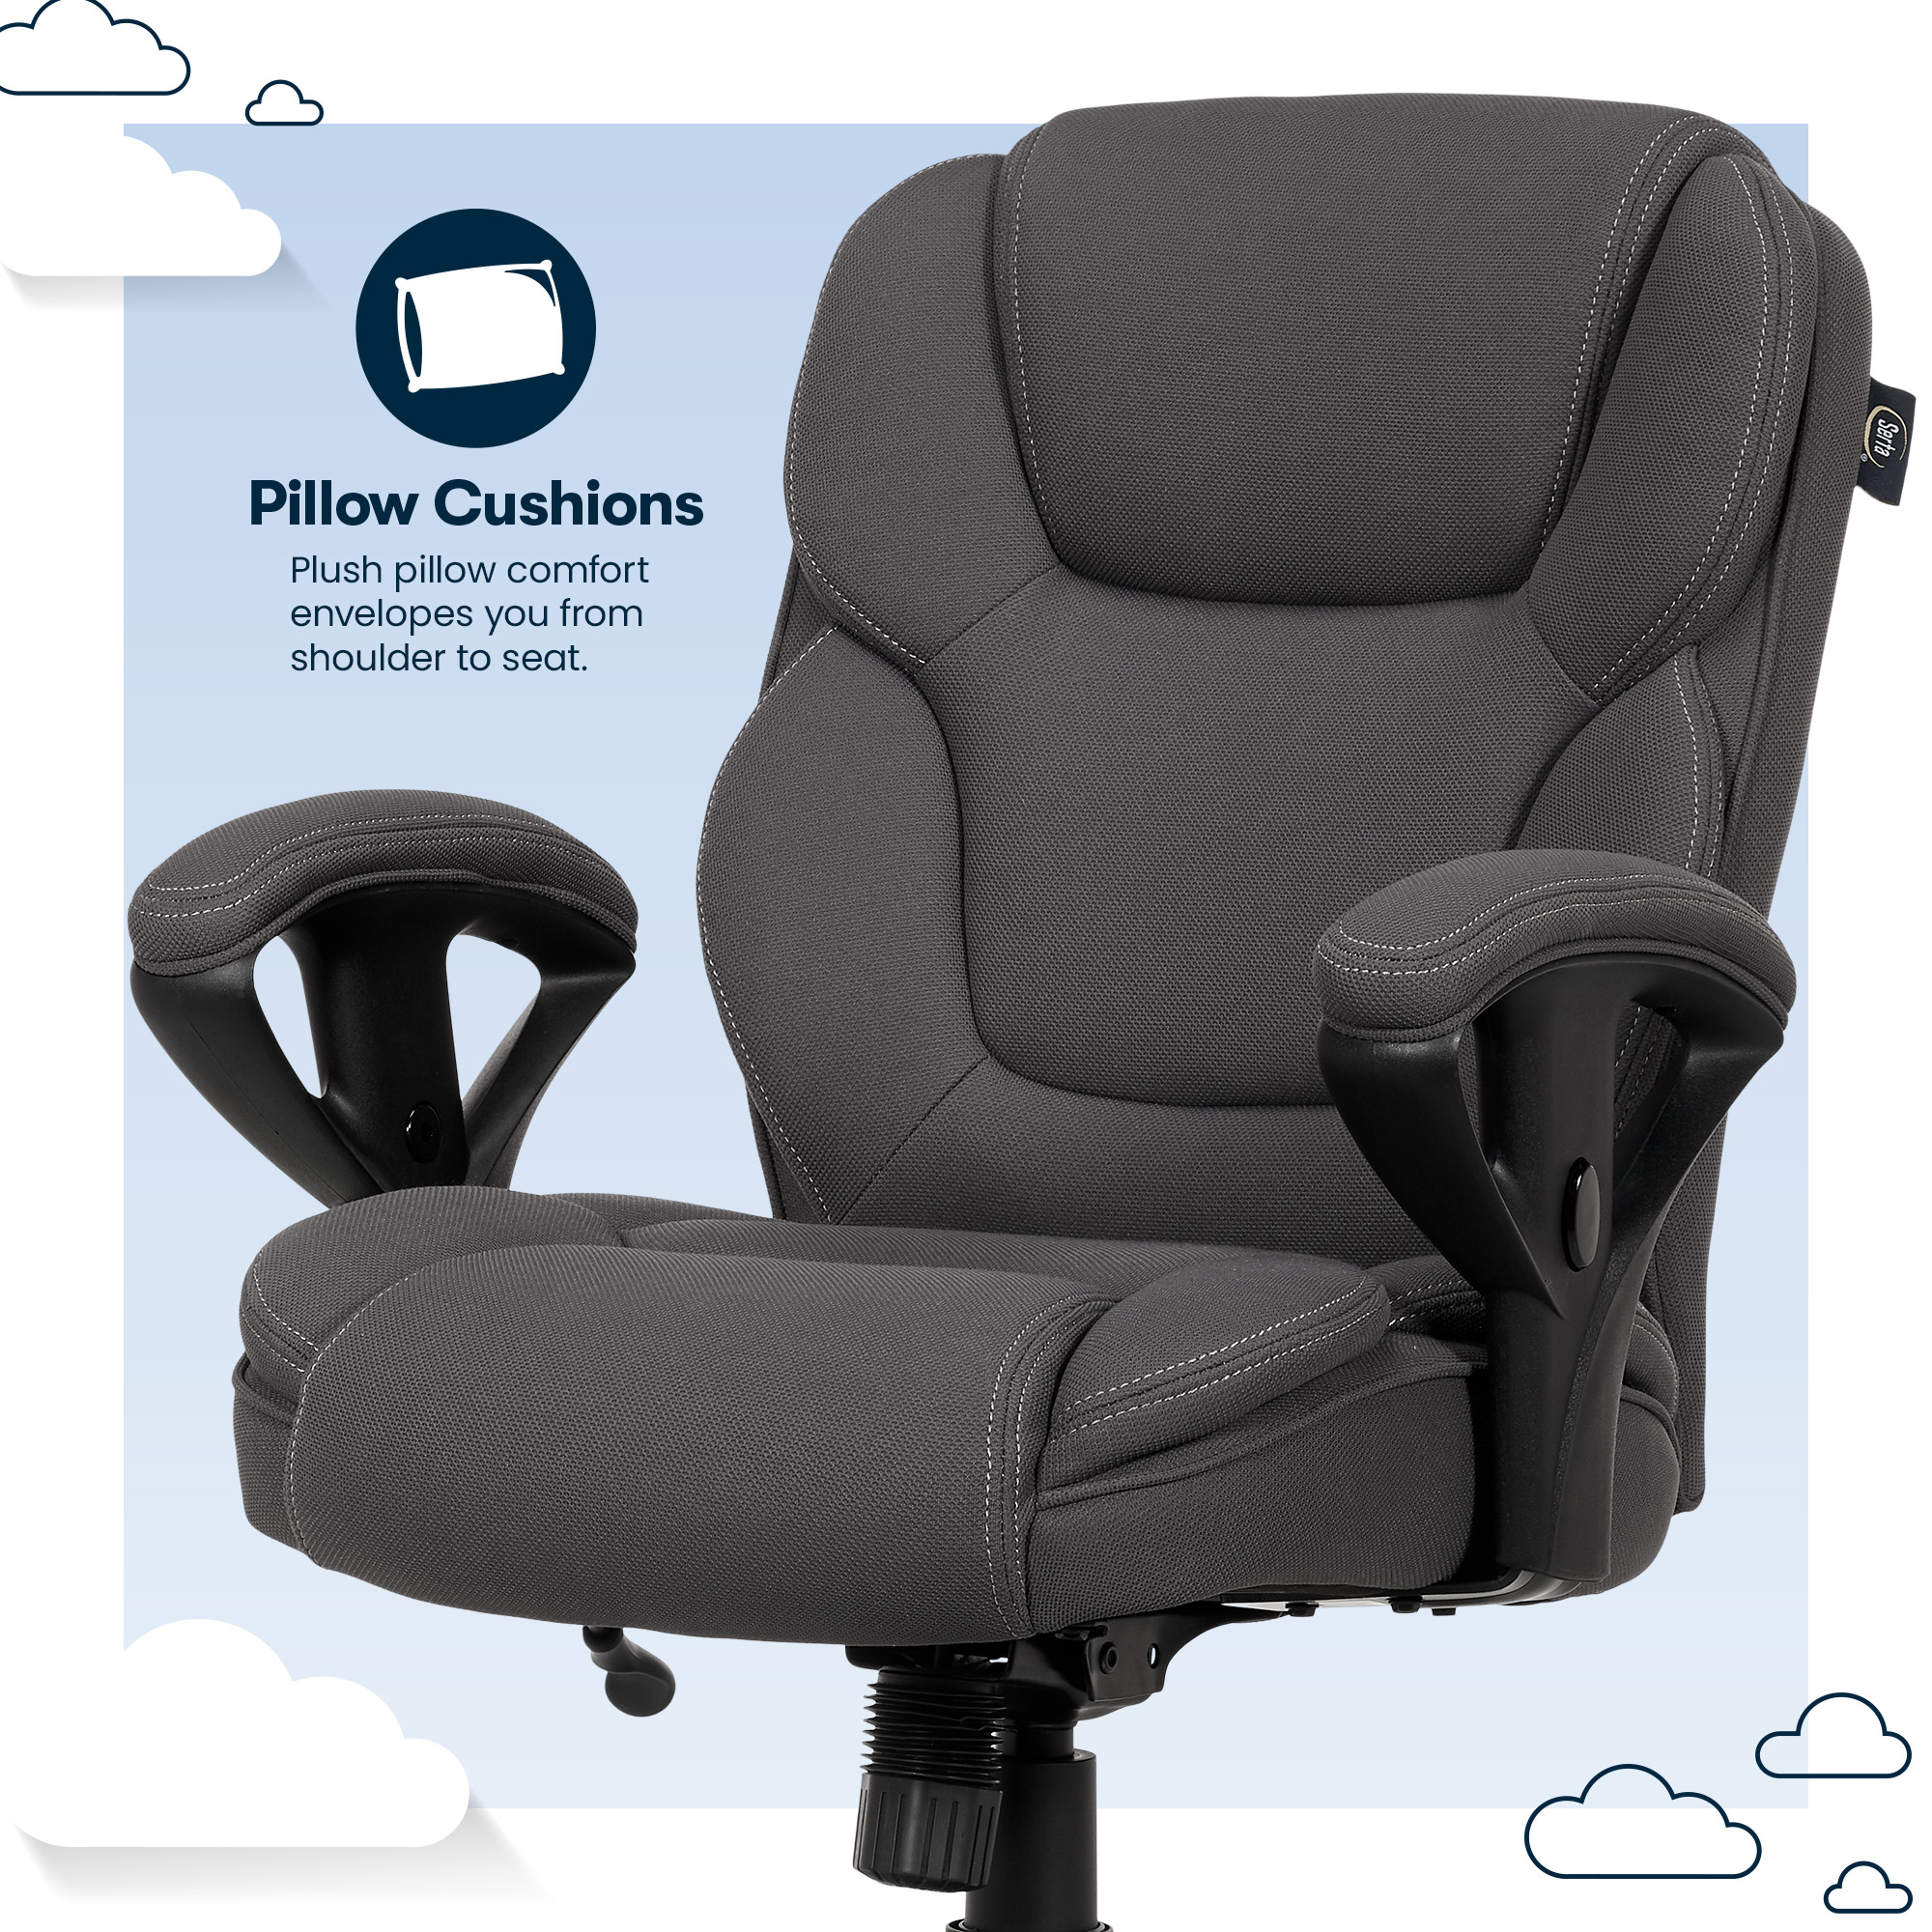 Serta Commercial Grade Task Office Chair, Supports up to 300 lbs., Dark Gray - image 4 of 15